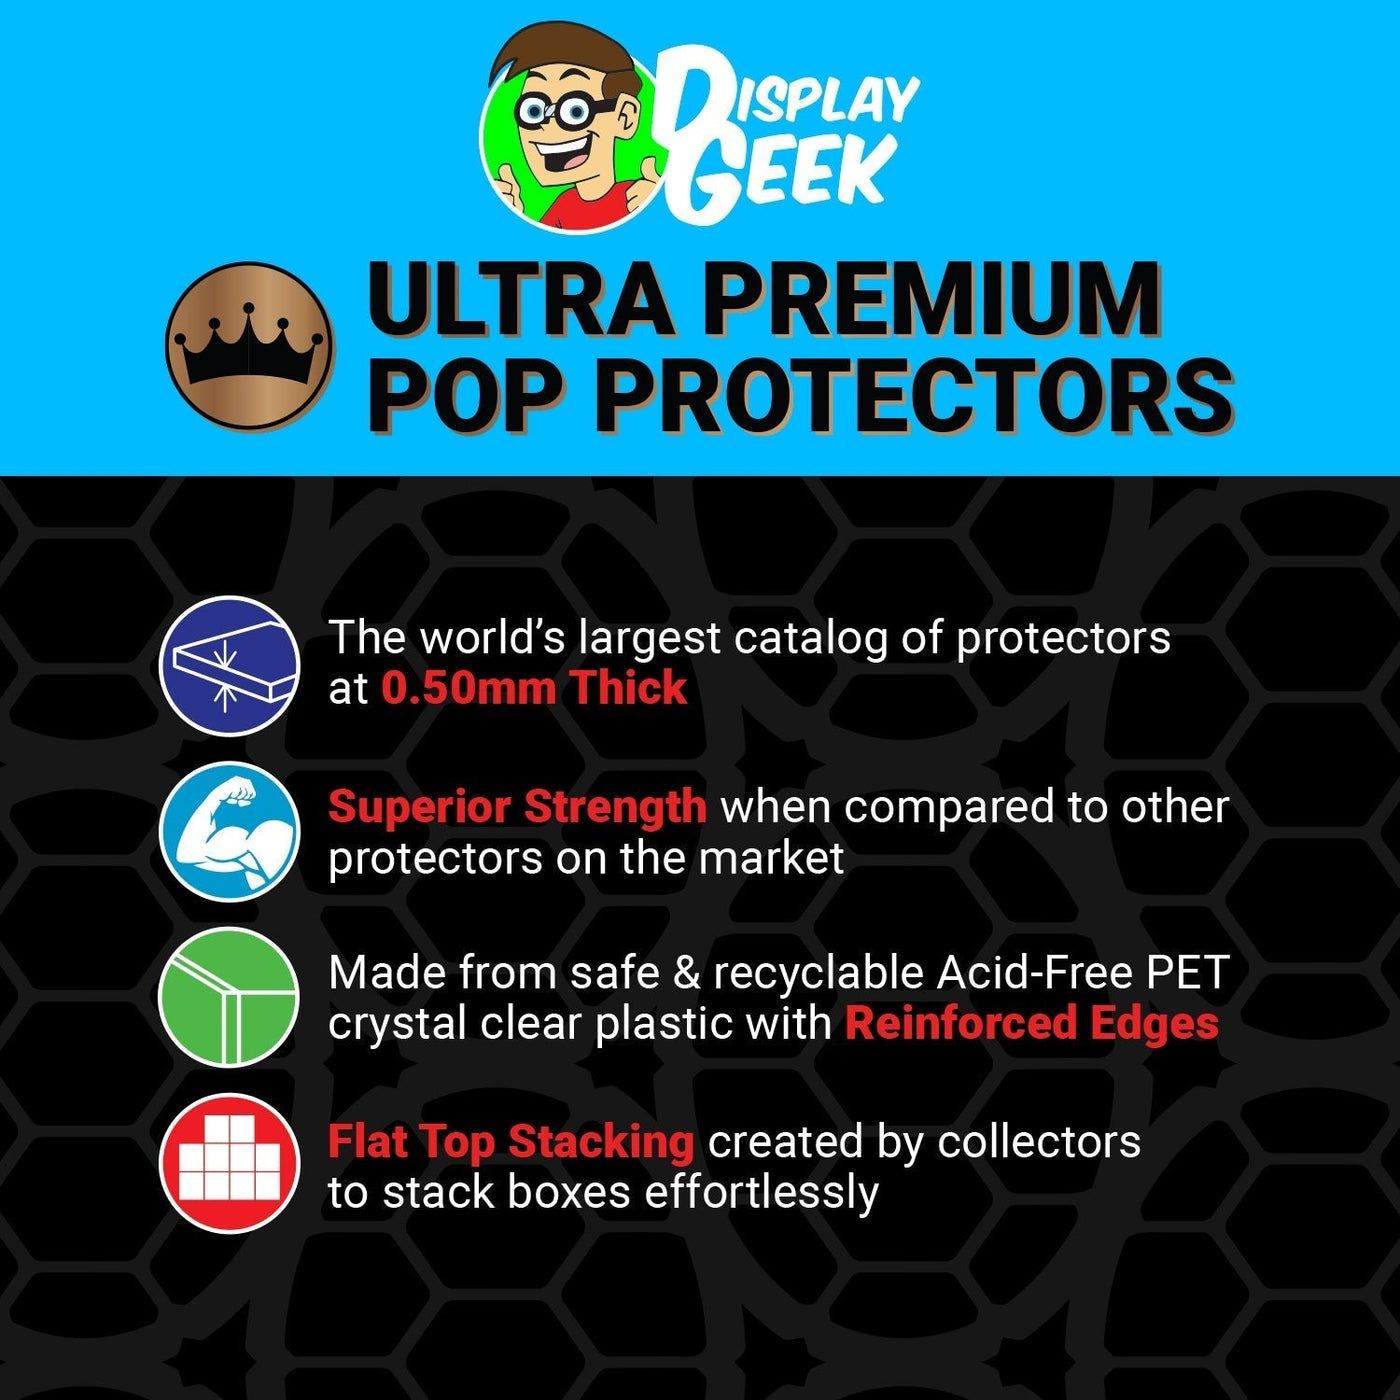 Pop Protector for 5 Pack New Kids on the Block Donnie, Joey, Jordan, Jonathan & Danny Funko Pop on The Protector Guide App by Display Geek